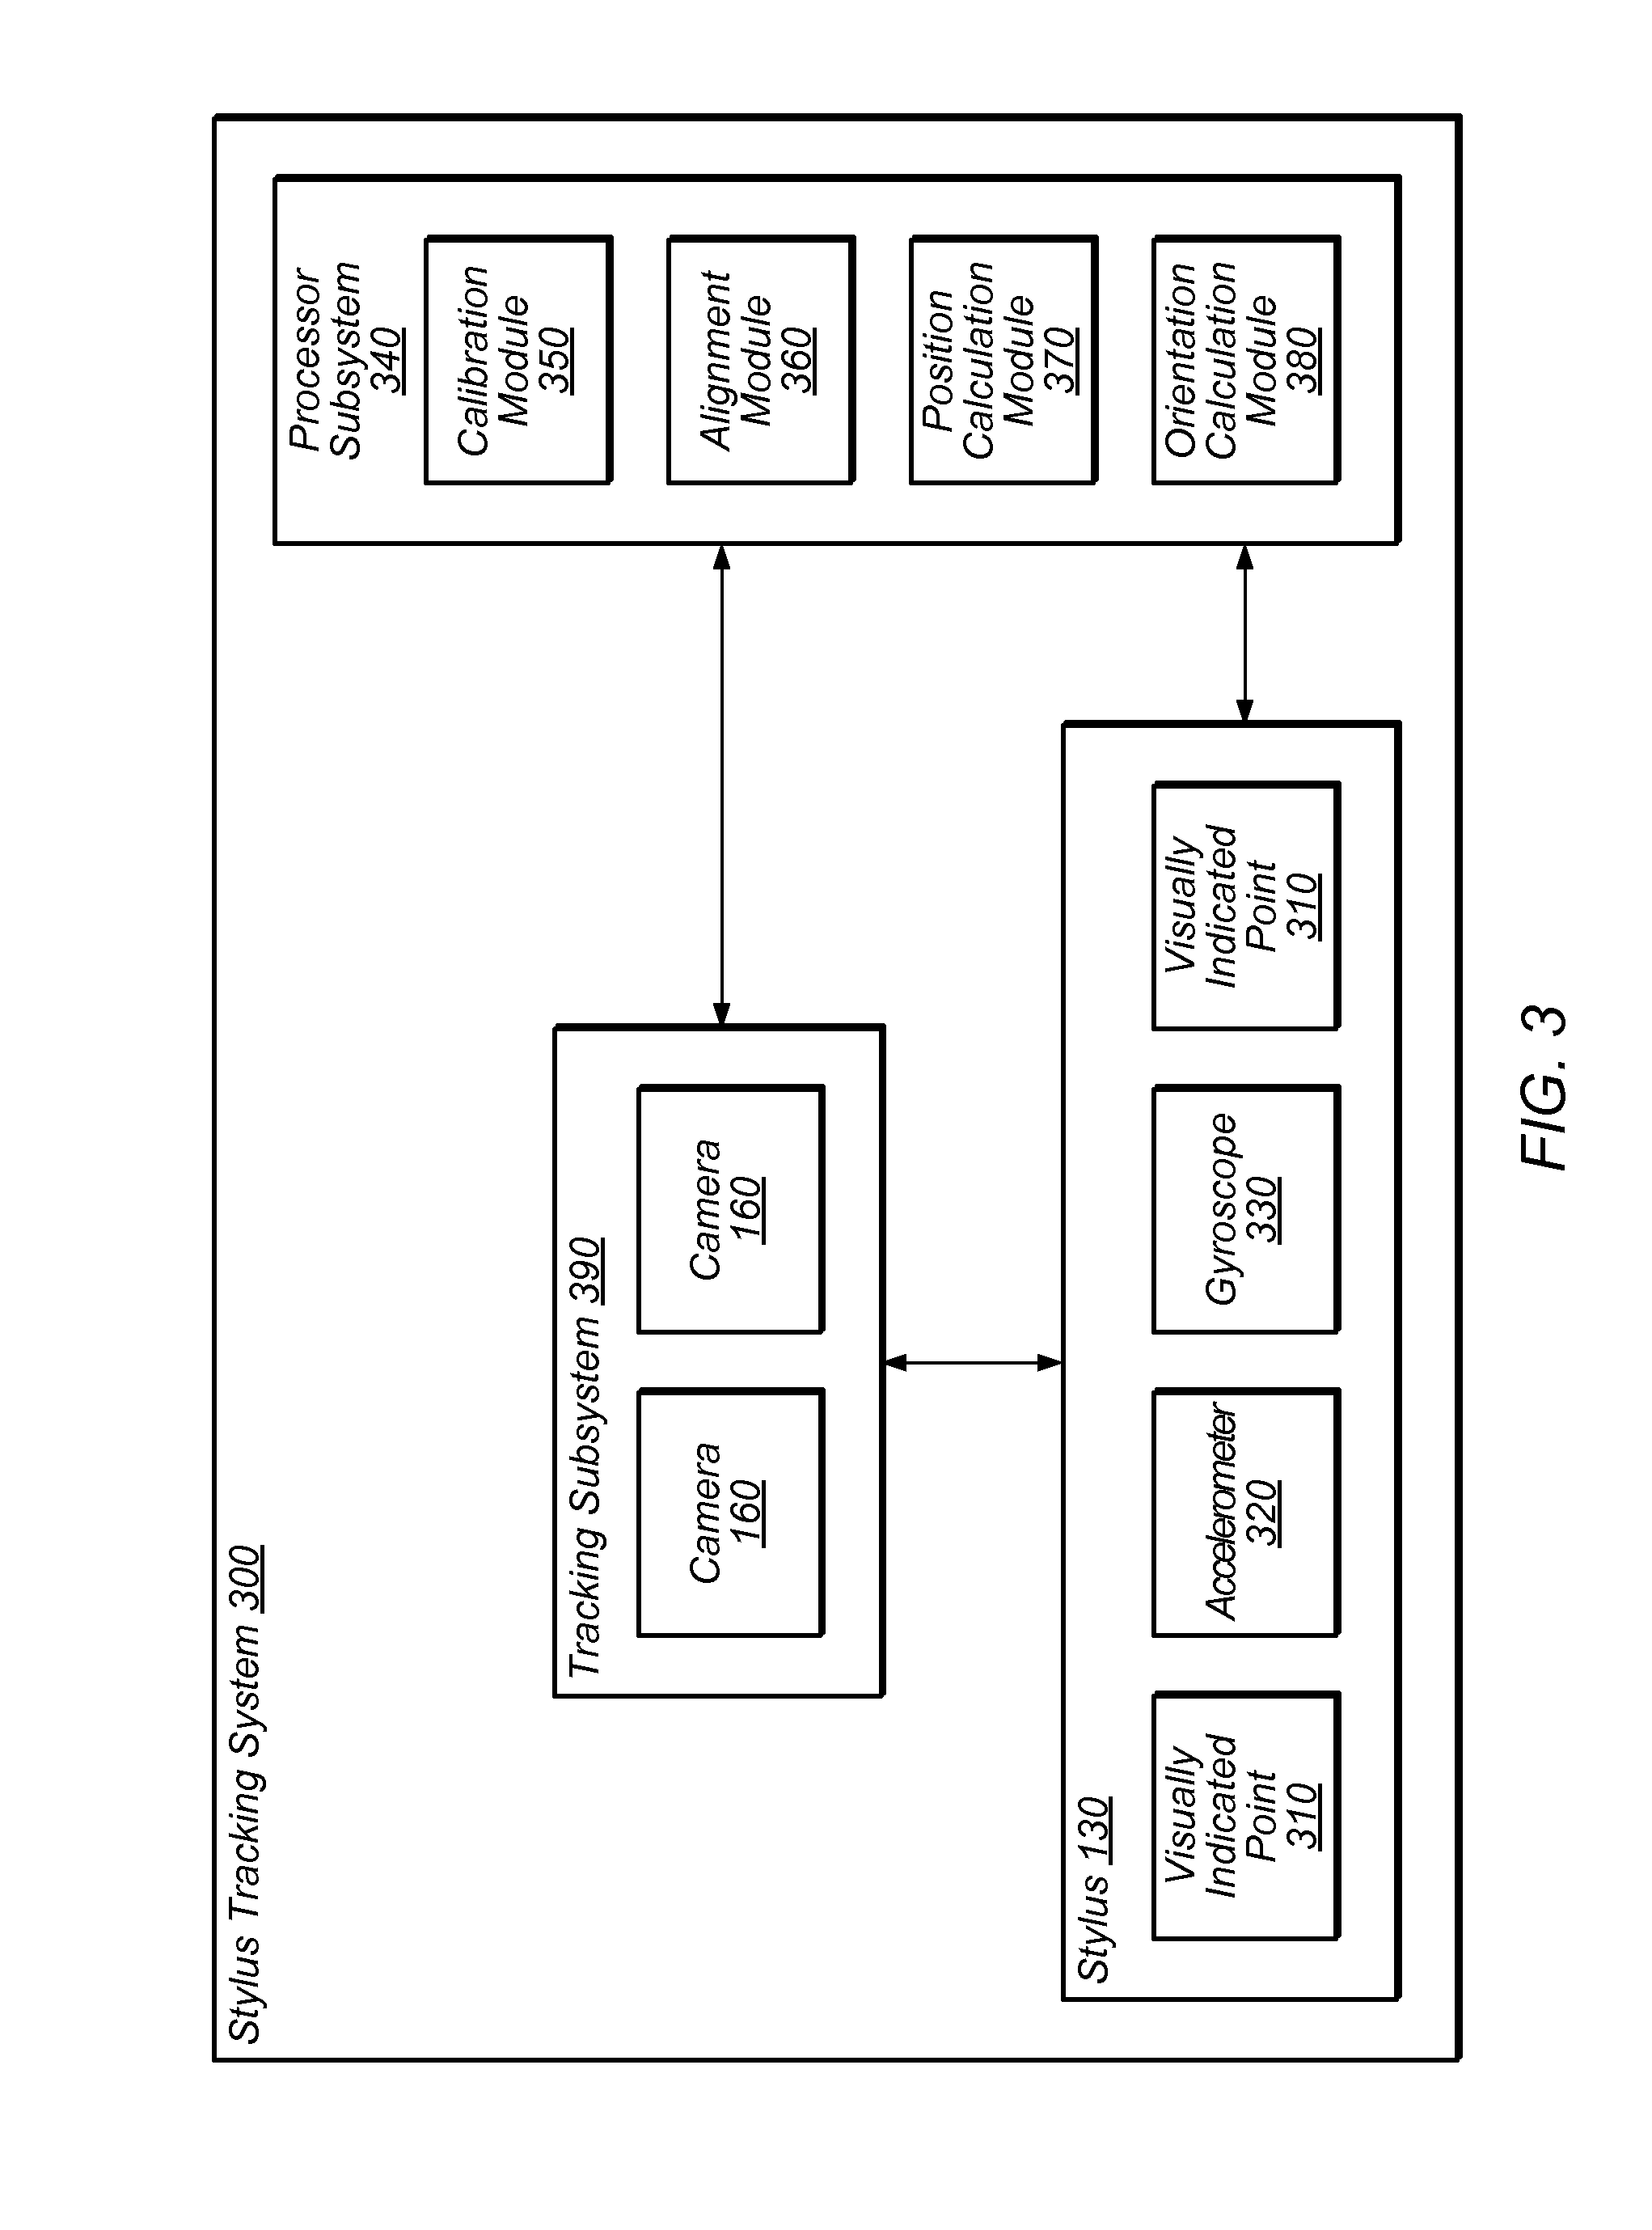 Three-Dimensional Tracking of a User Control Device in a Volume